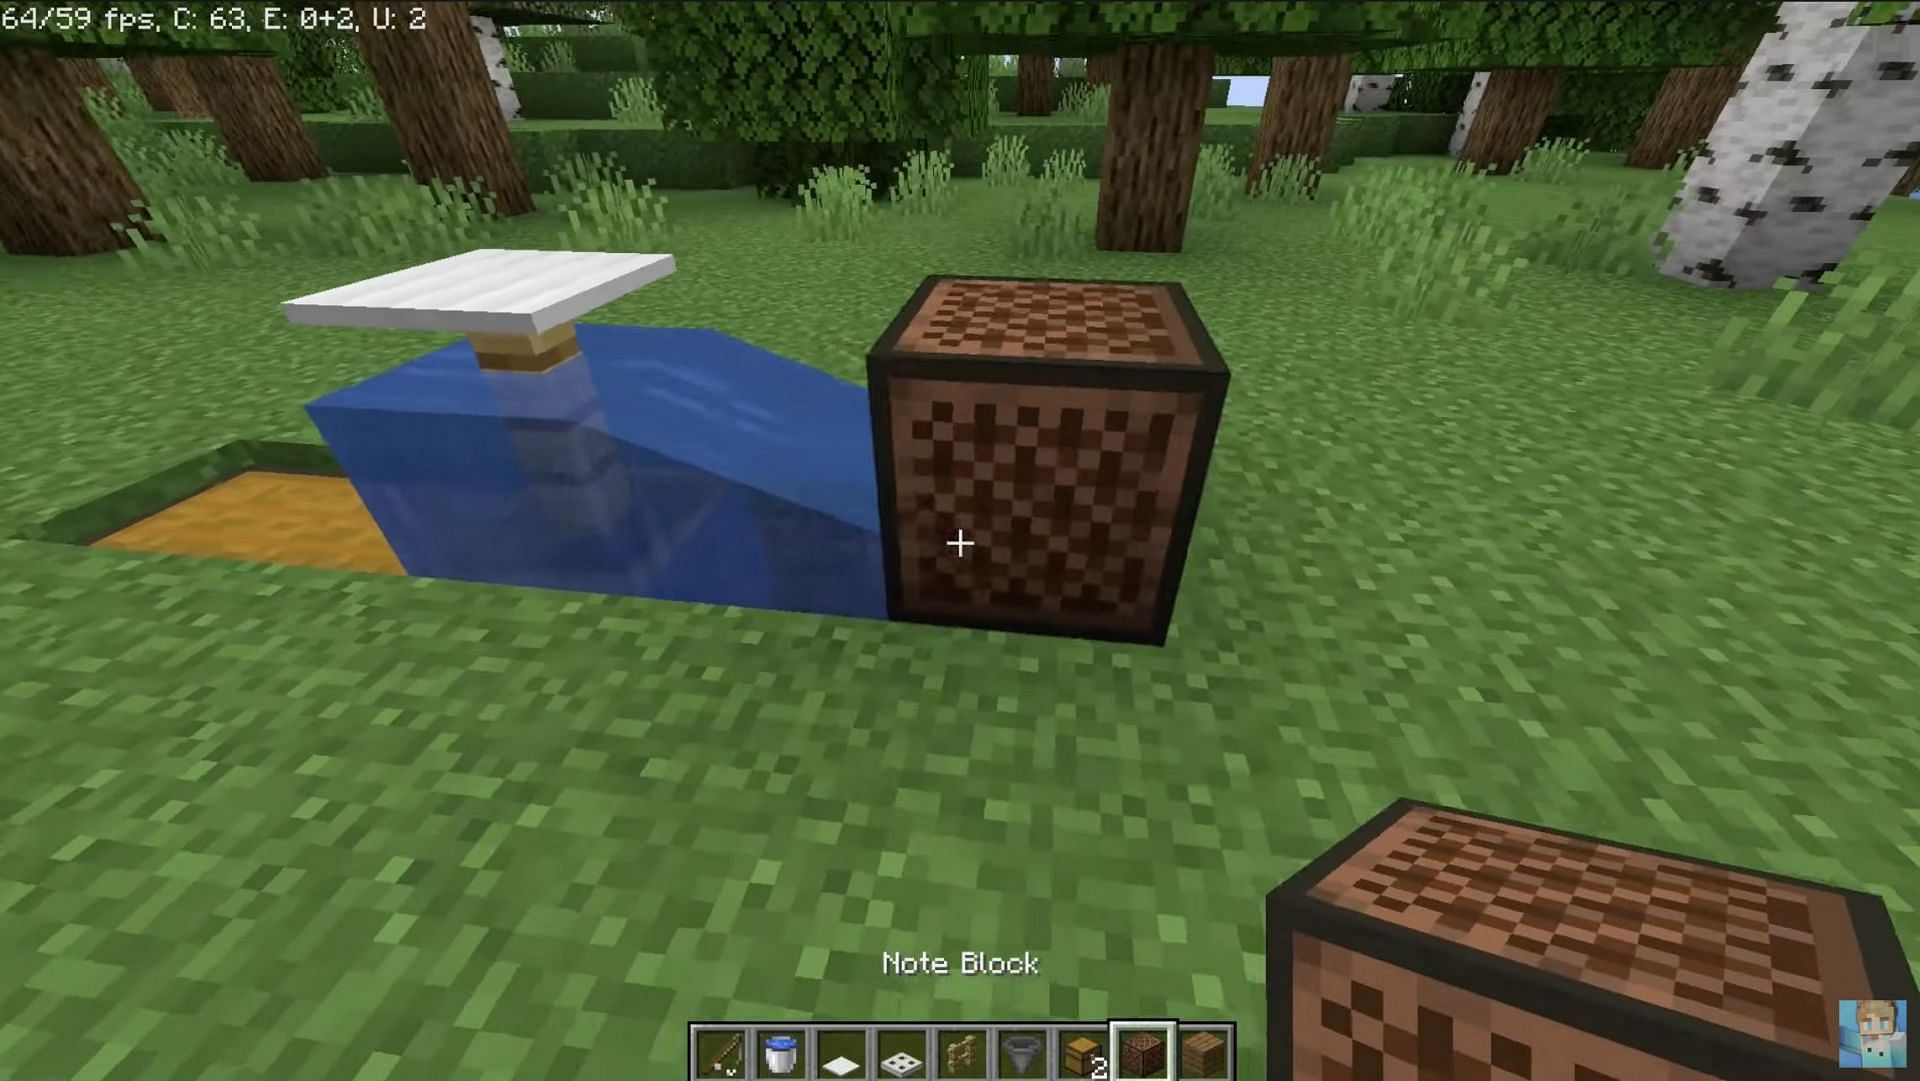 Each block in place (Image via Taffy on YouTube)